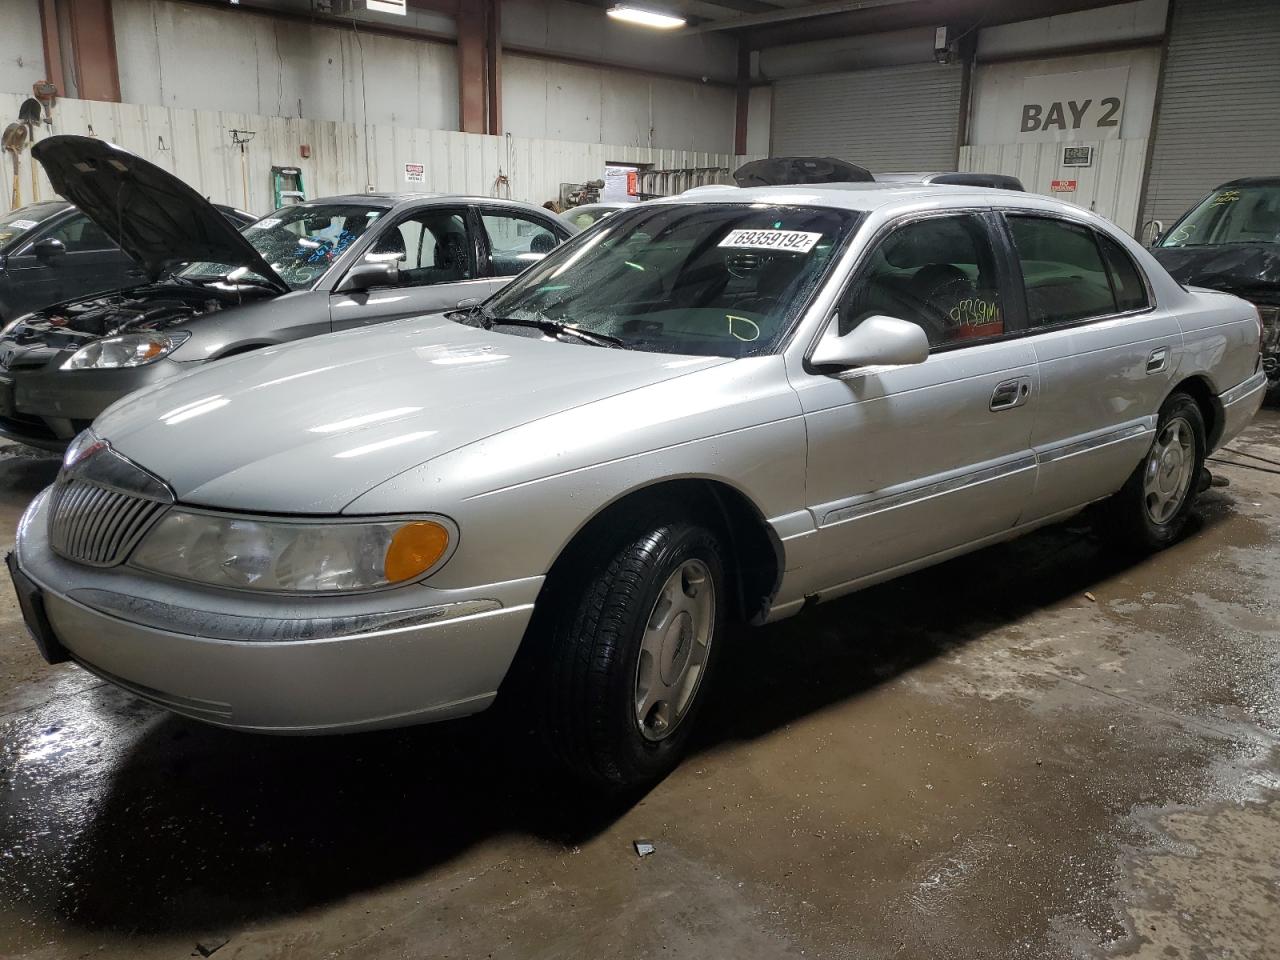 2001 Lincoln Continental for sale at Copart Elgin, IL. Lot #69359*** |  SalvageAutosAuction.com